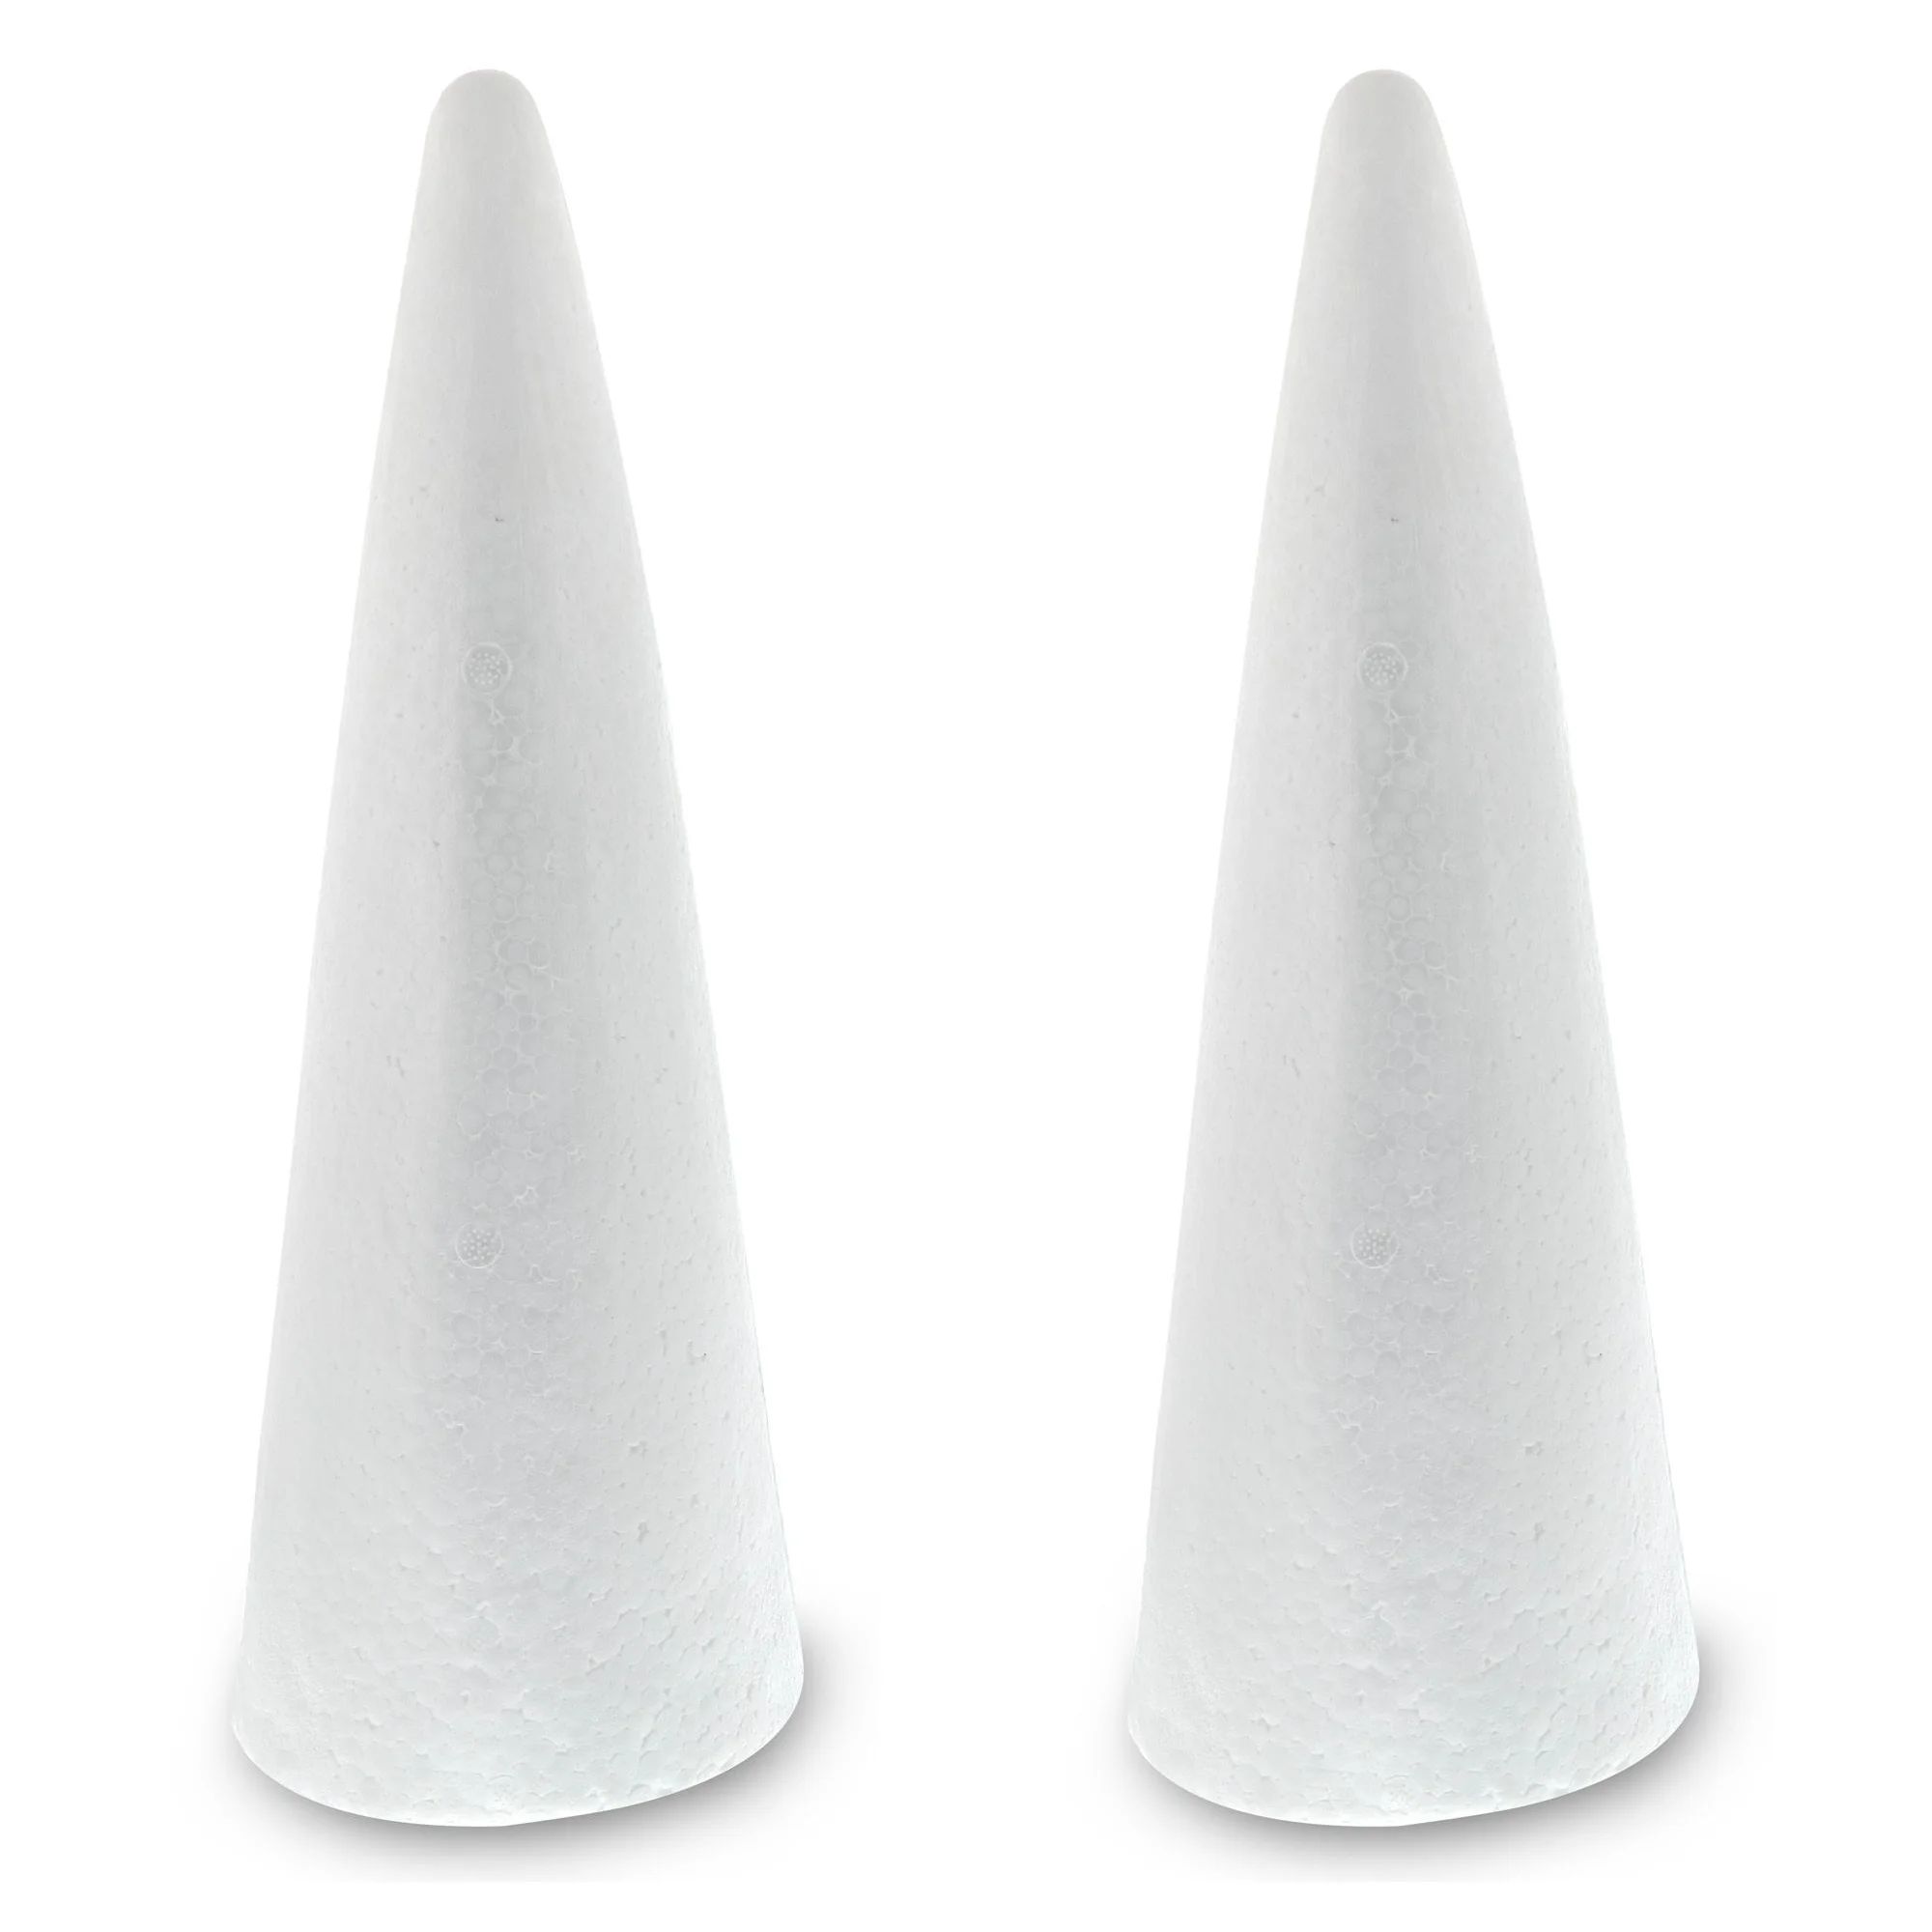 2 Pack Foam Cones for Crafts, DIY Art Projects, Handmade Gnomes, Trees, Holiday Decorations (5.25... | Walmart (US)